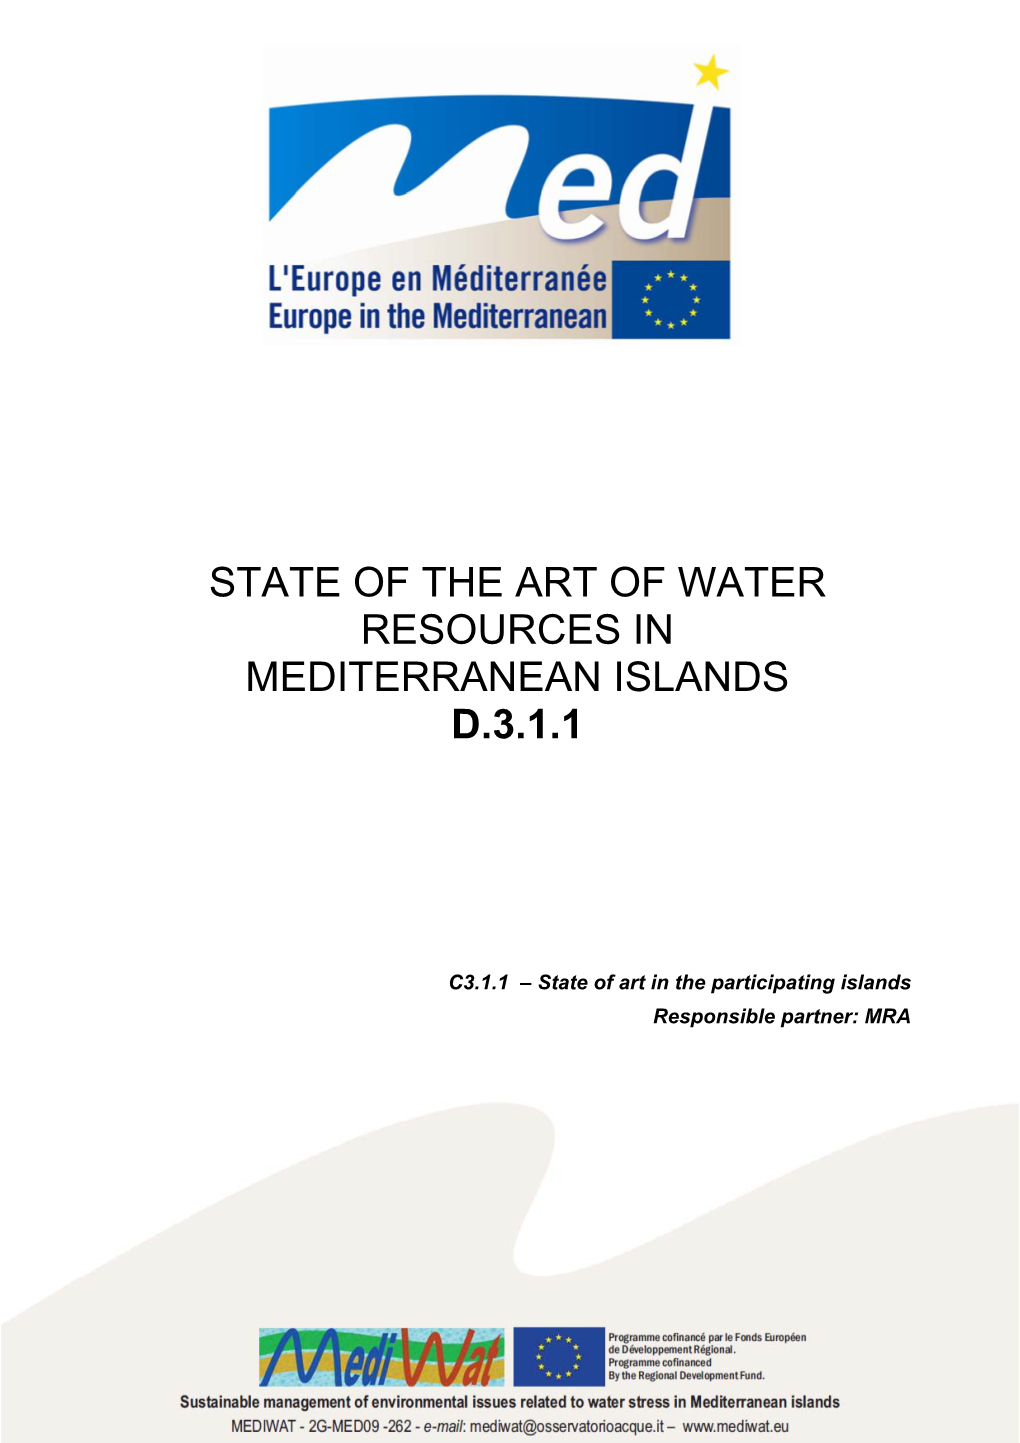 State of the Art of Water Resources in Mediterranean Islands D.3.1.1